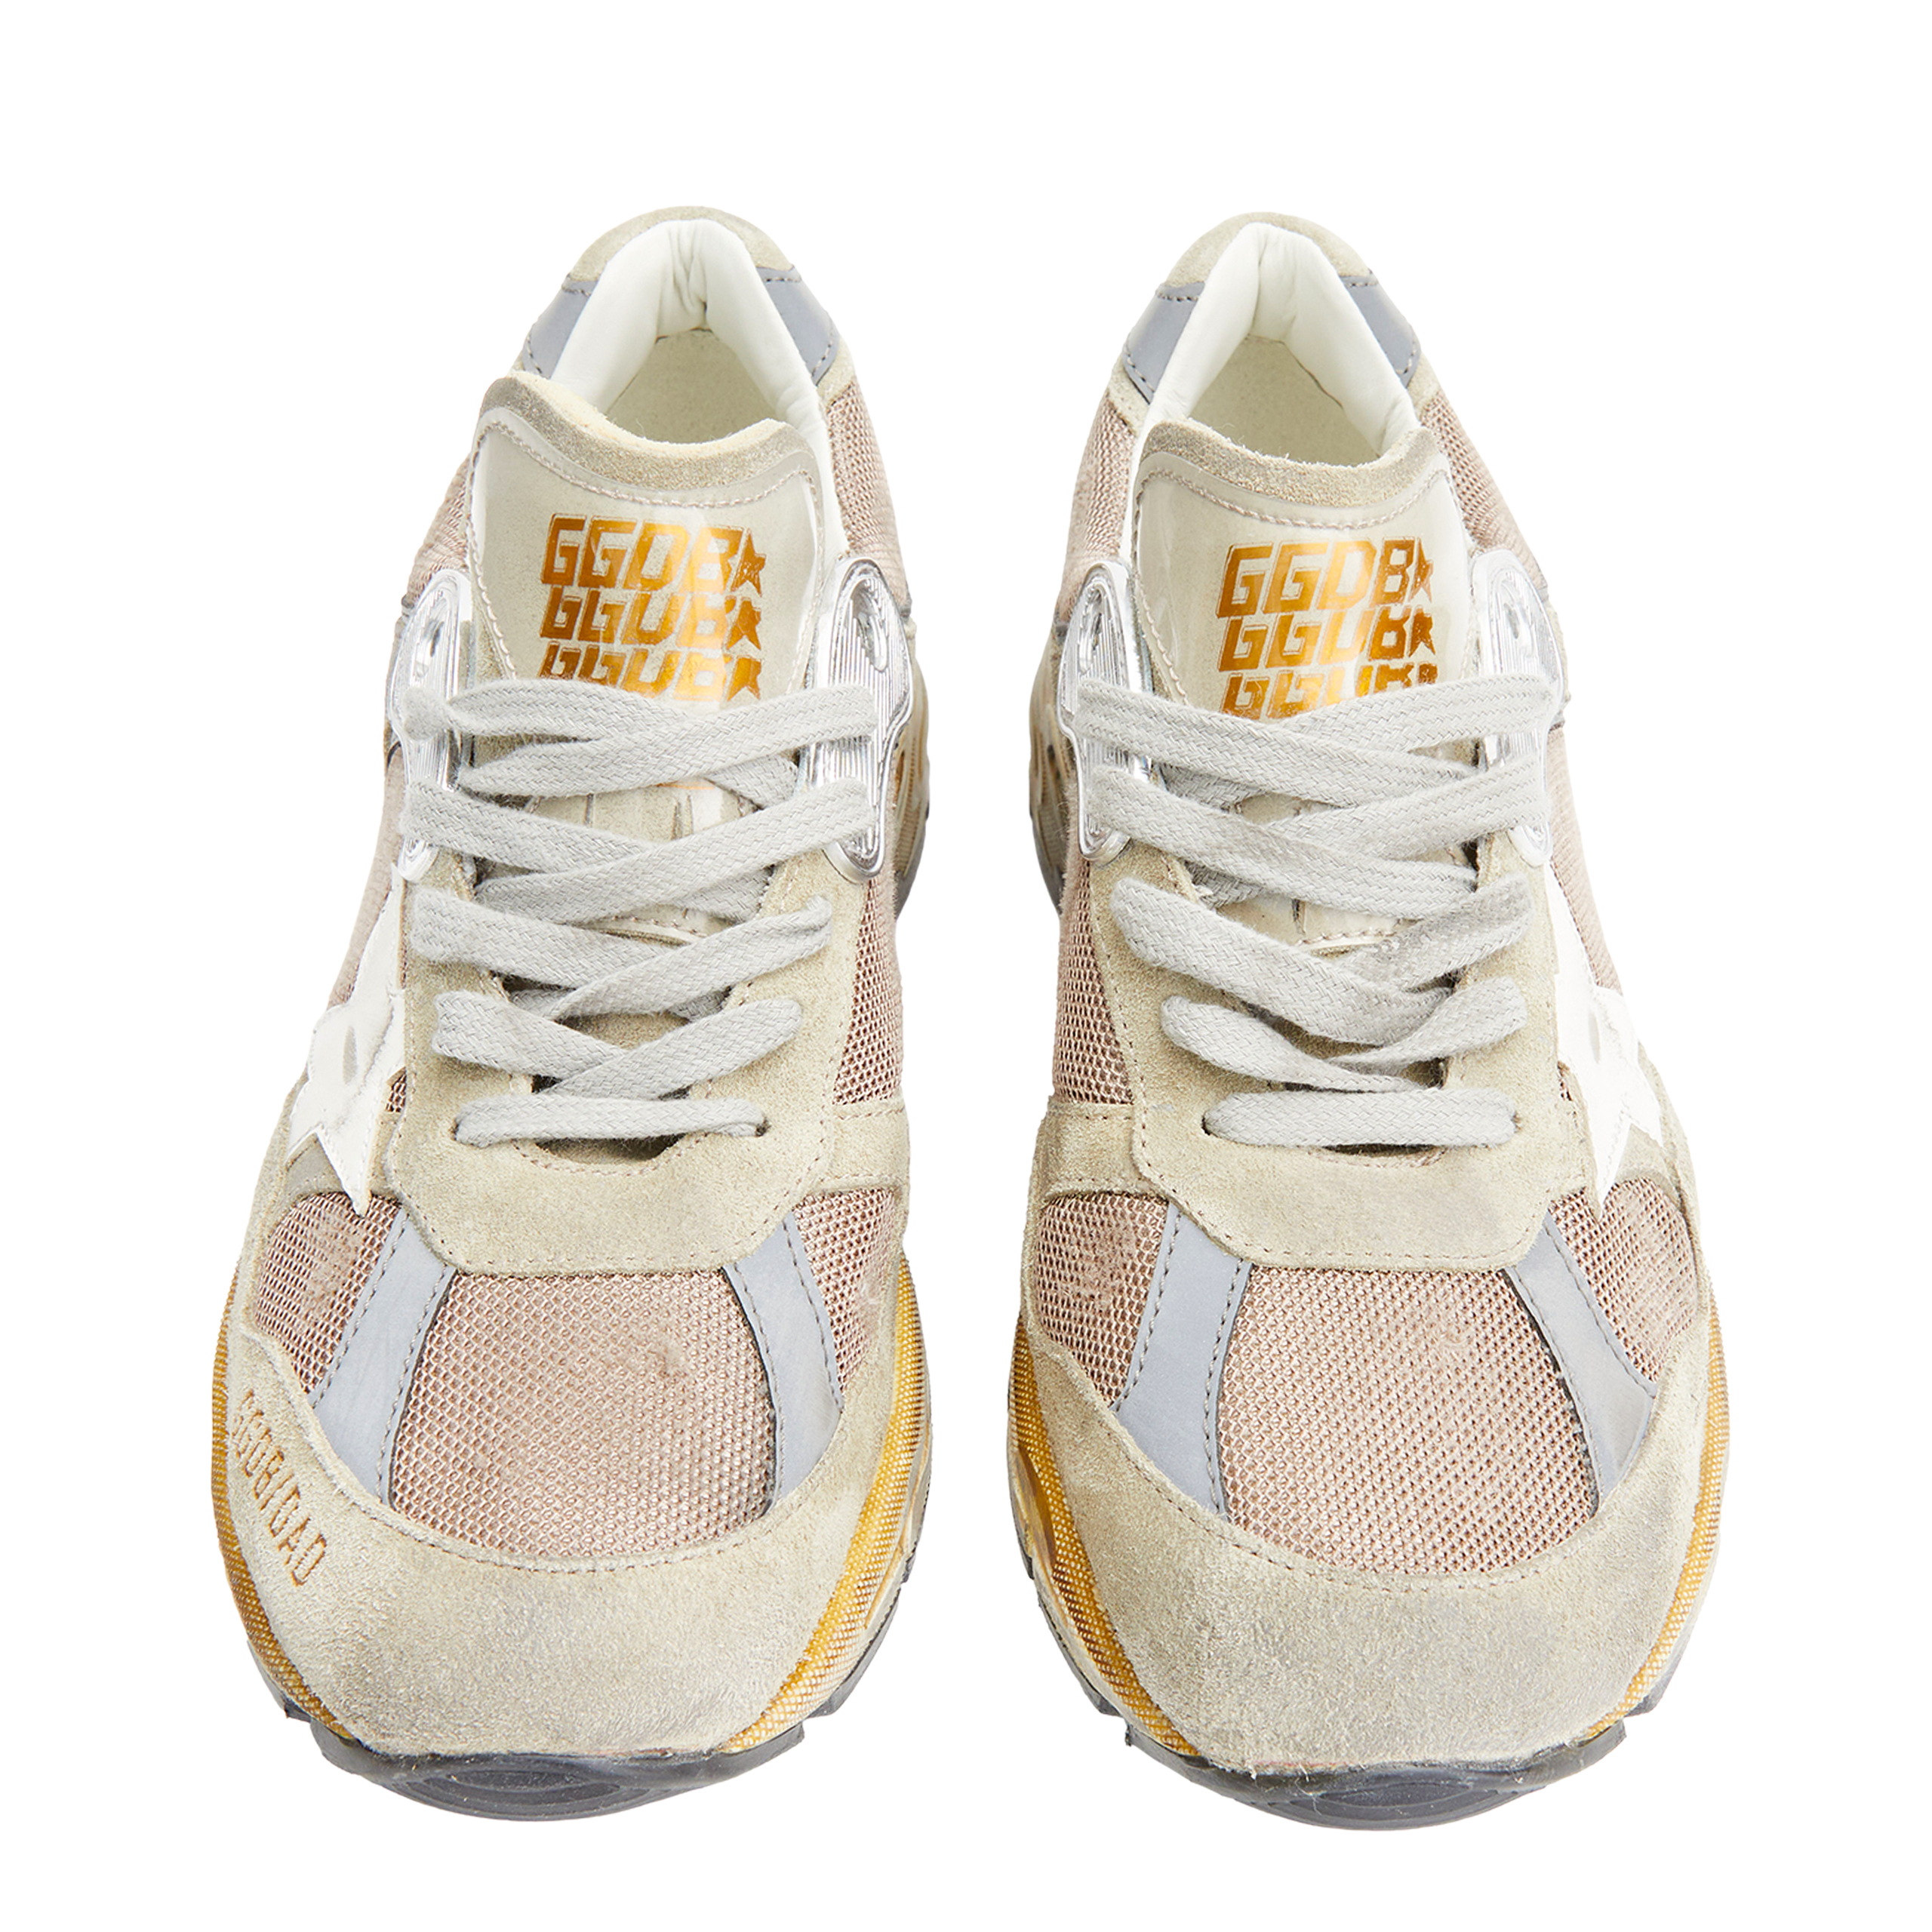 None Golden Goose Deluxe Brand GMF00199/F003271/81751, размер 40;41;42;43;44;45;46